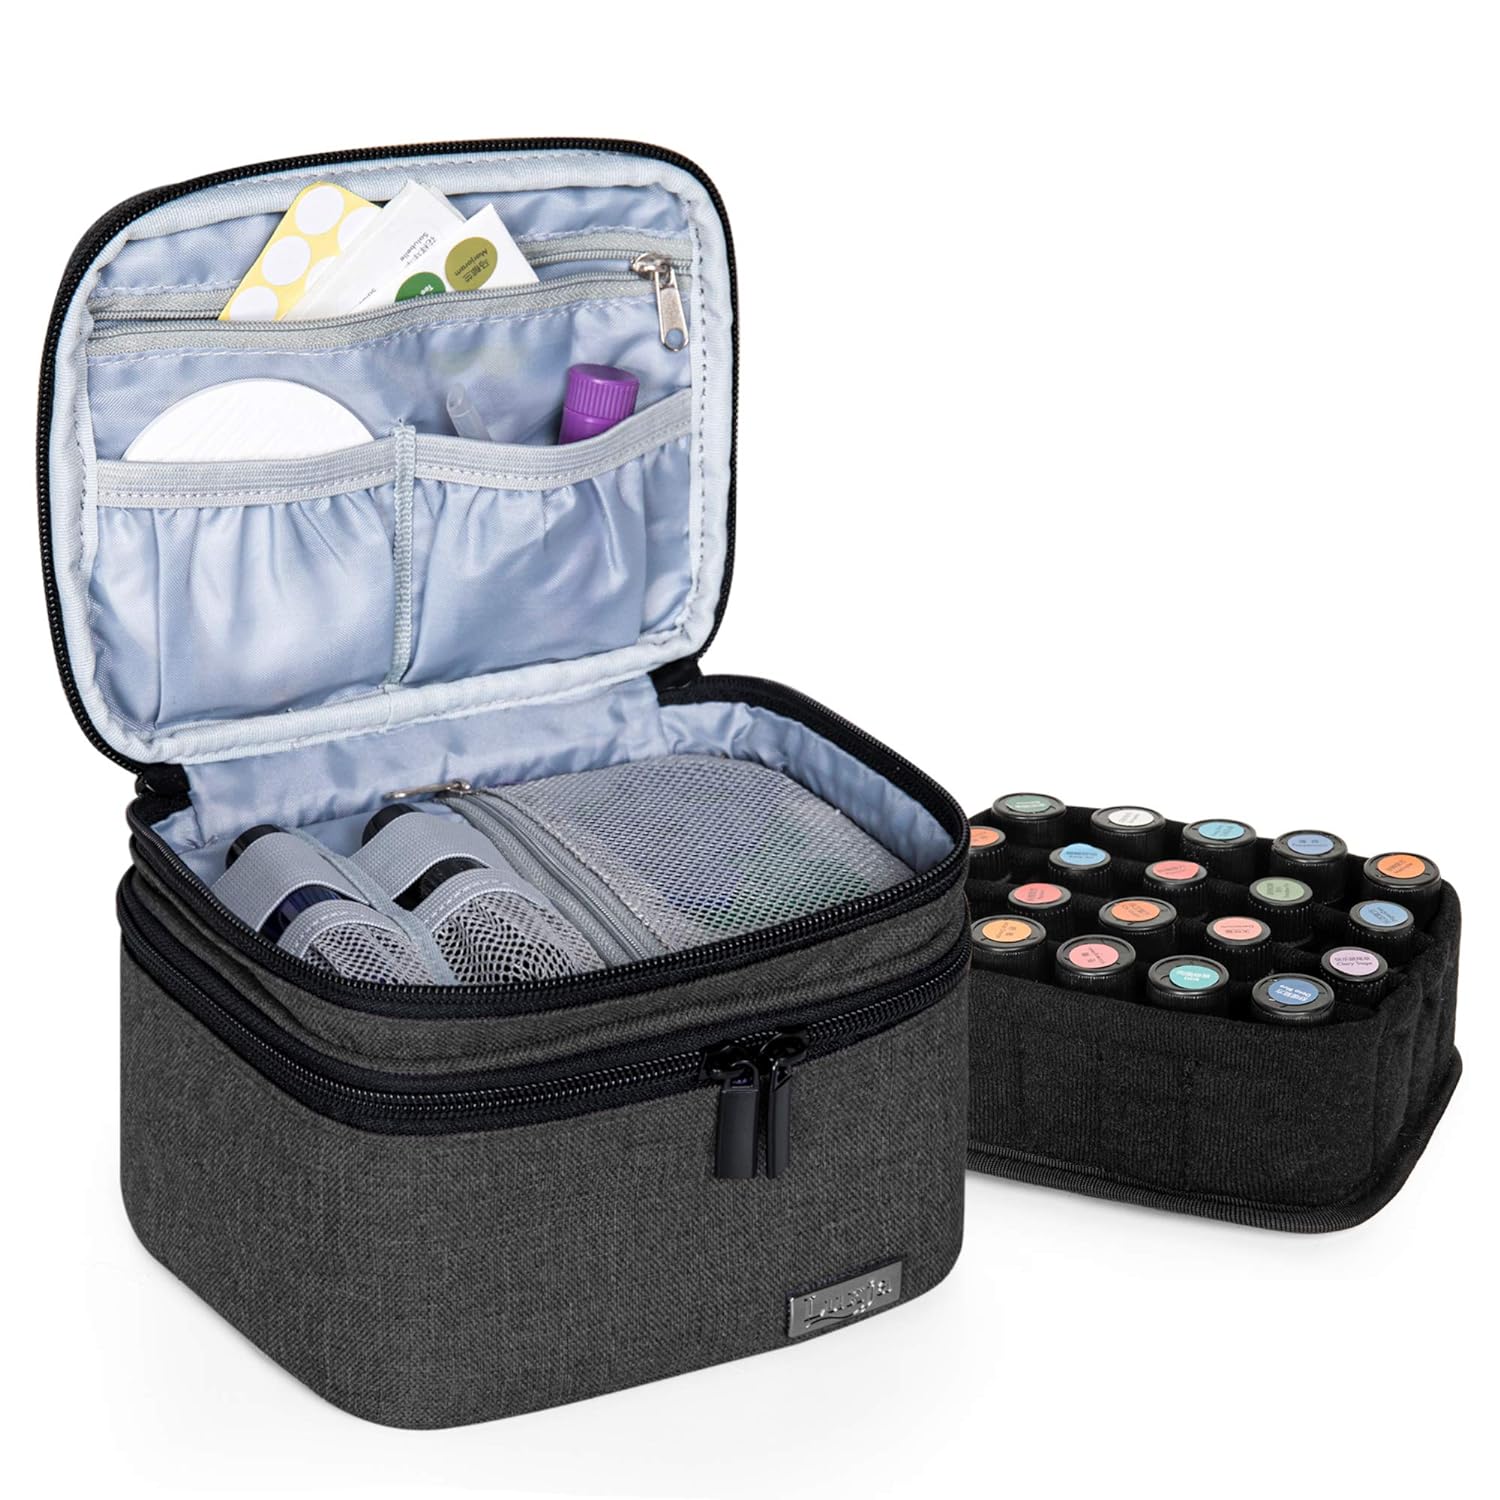 LUXJA Essential Oils Bag - Holds 20 Bottles (5ml-30ml, Also Fits for Roller Bottles), Double-Layer Organizer for Essential Oil and Accessories, Black